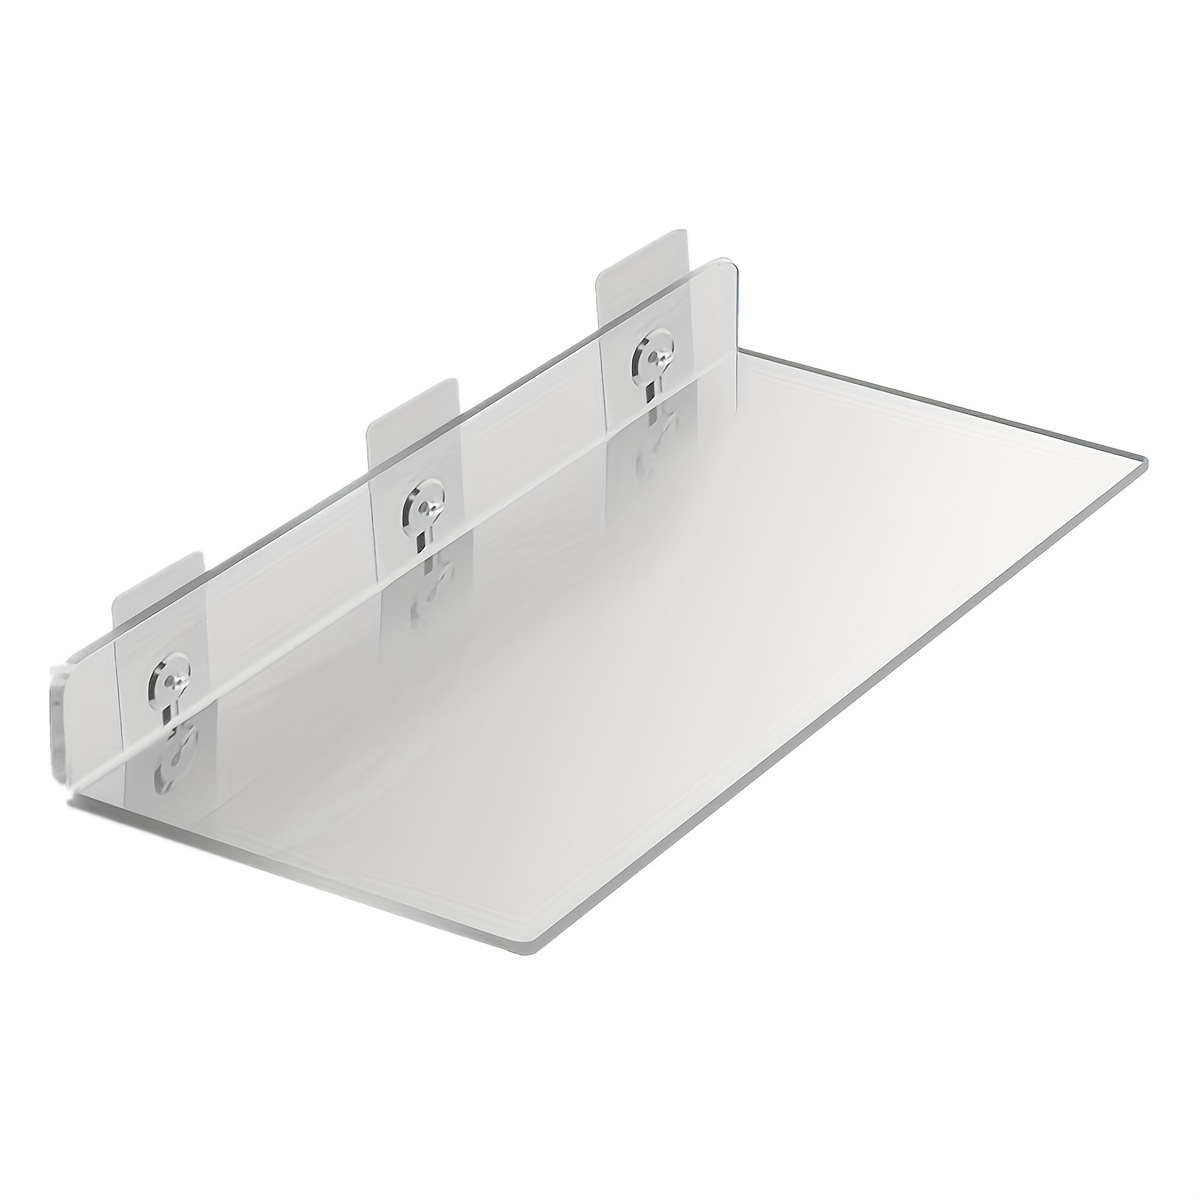 

1pc Clear Acrylic Shelf For Bathroom, Bedroom, And Living Room - Wall Mounted Invisible Shelves (13.78 X 5.91)